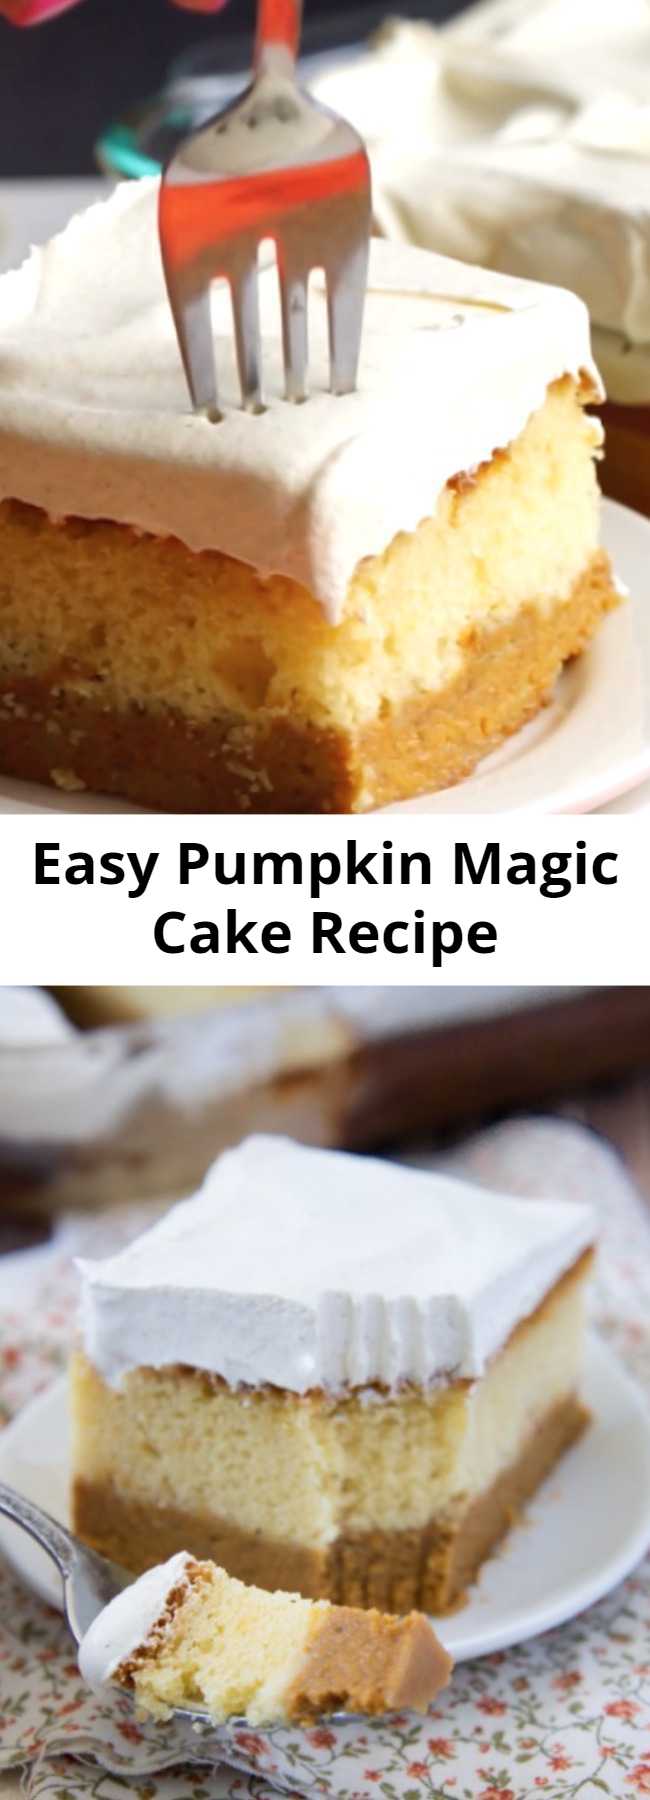 Pumpkin Magic Cake Recipe - PumpkinMagic Cake has a layer of pumpkin pie on the bottom, a layer of cake in the middle, finished off with a sweet layer of pumpkin pie spiced pudding/frosting on top.